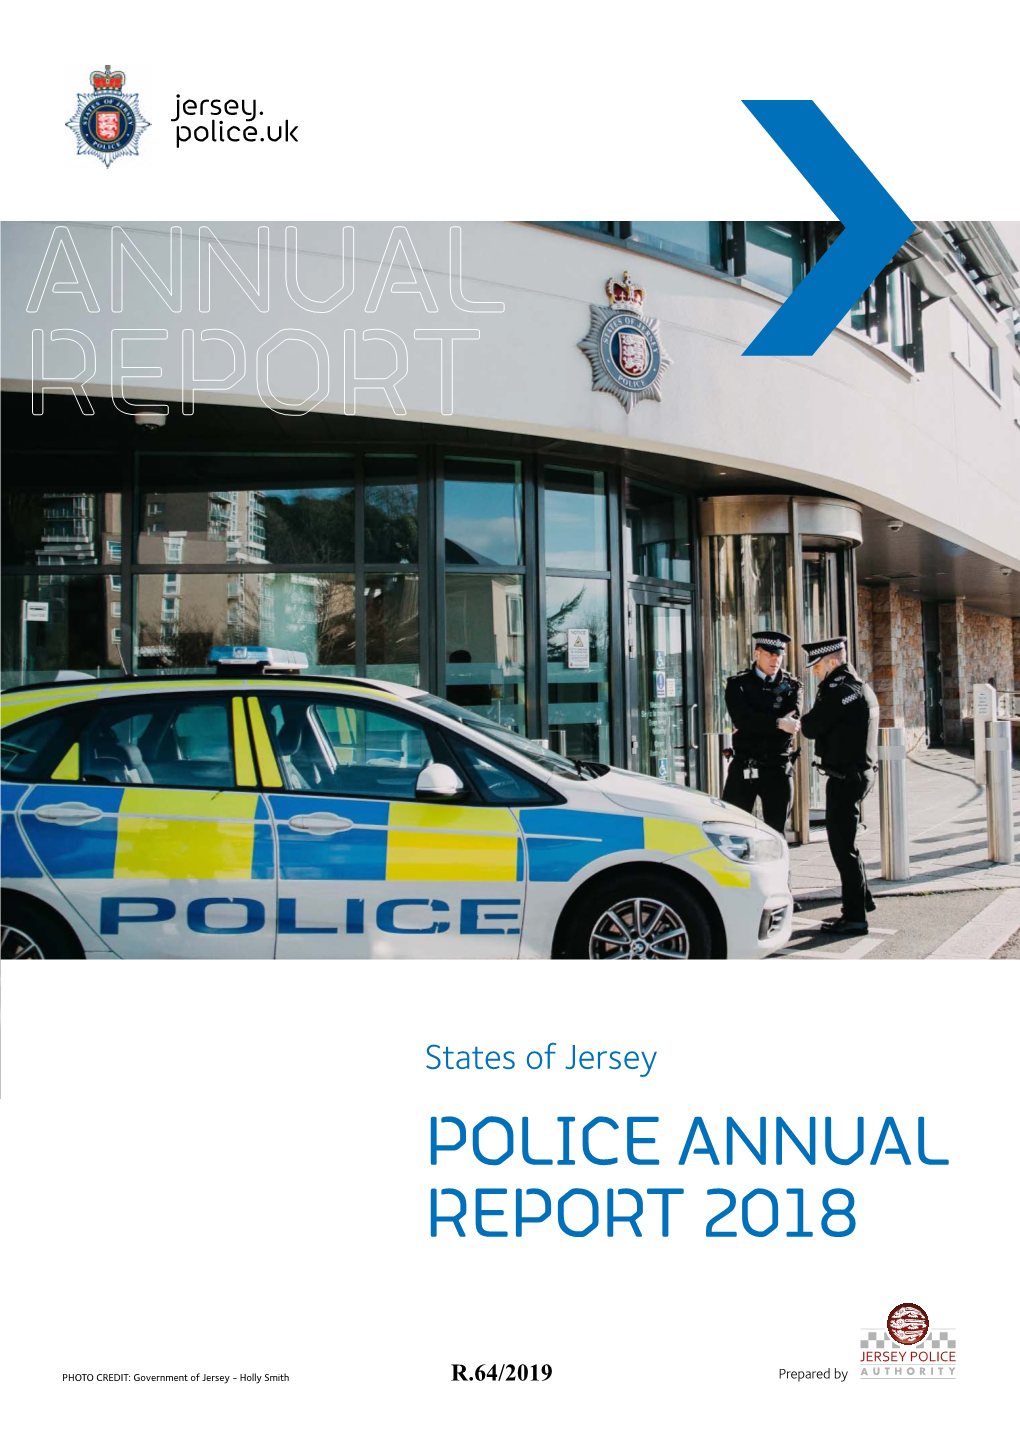 States of Jersey Police: Annual Report 2018